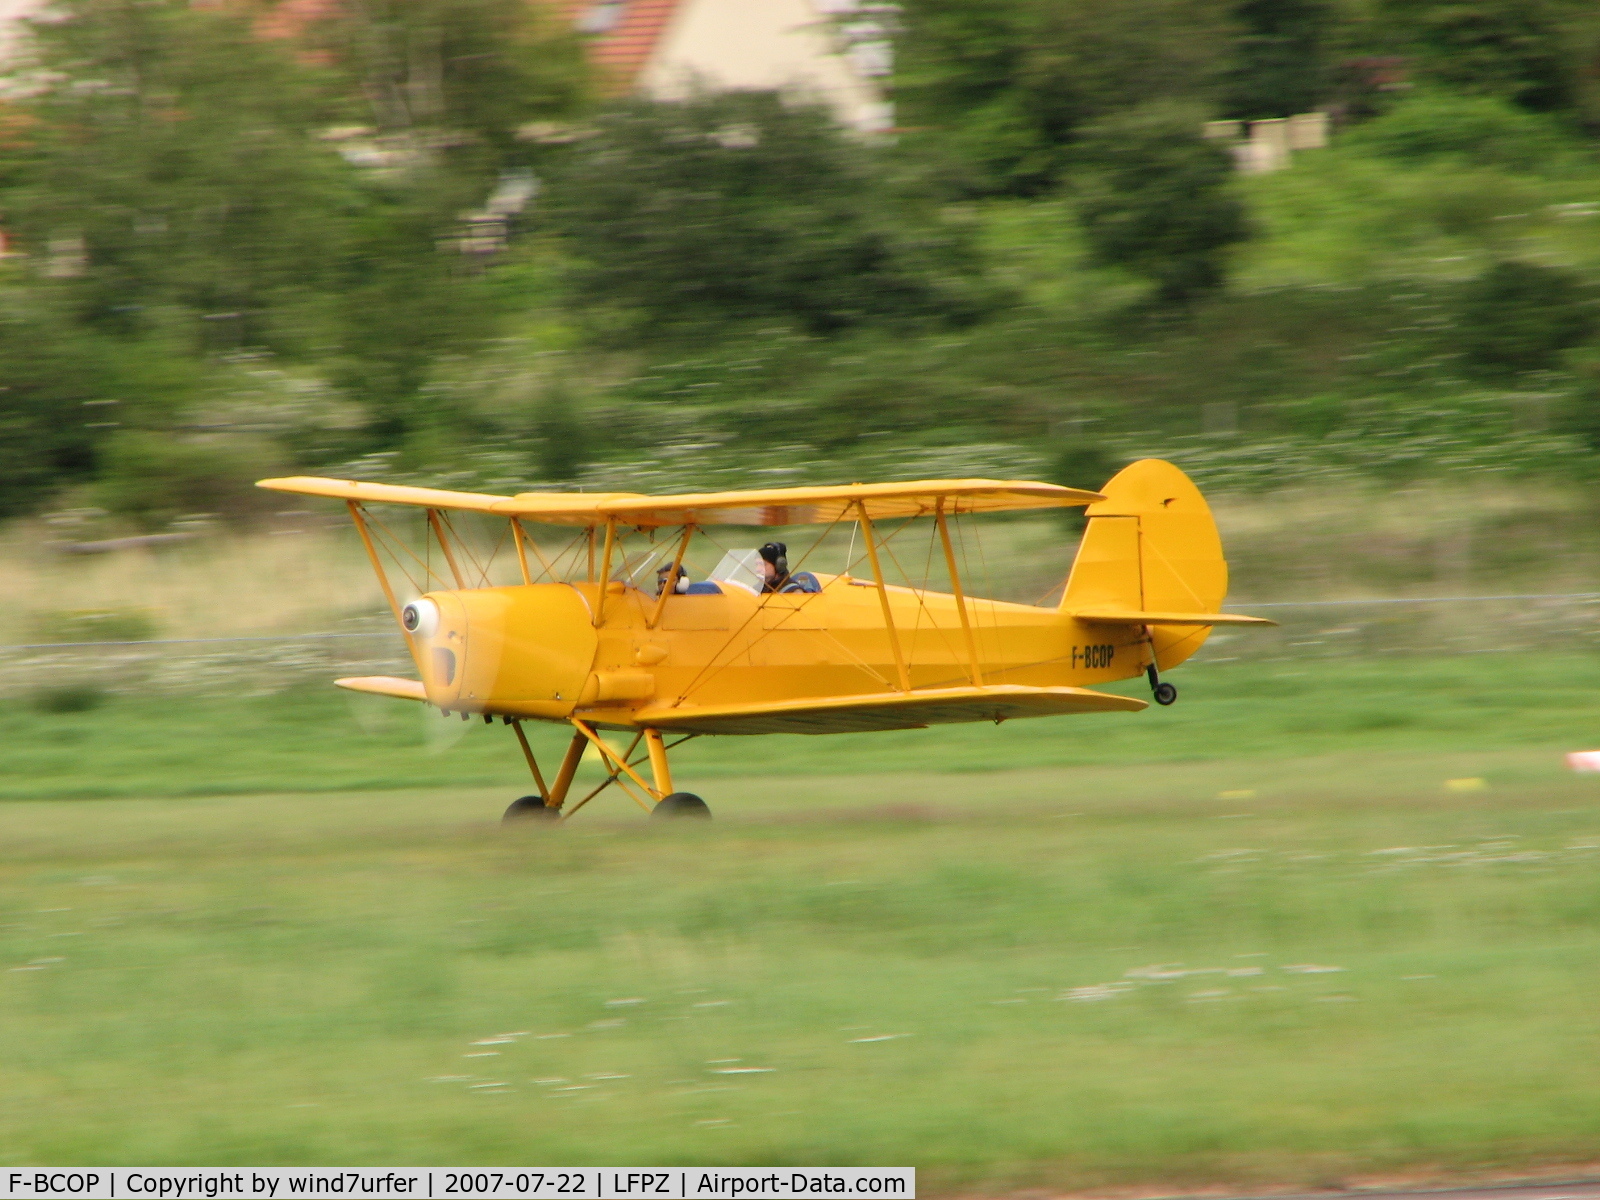 F-BCOP, Stampe-Vertongen SV-4C C/N 328, Came back a few minutes later with a broken thrust cable (safe landing)